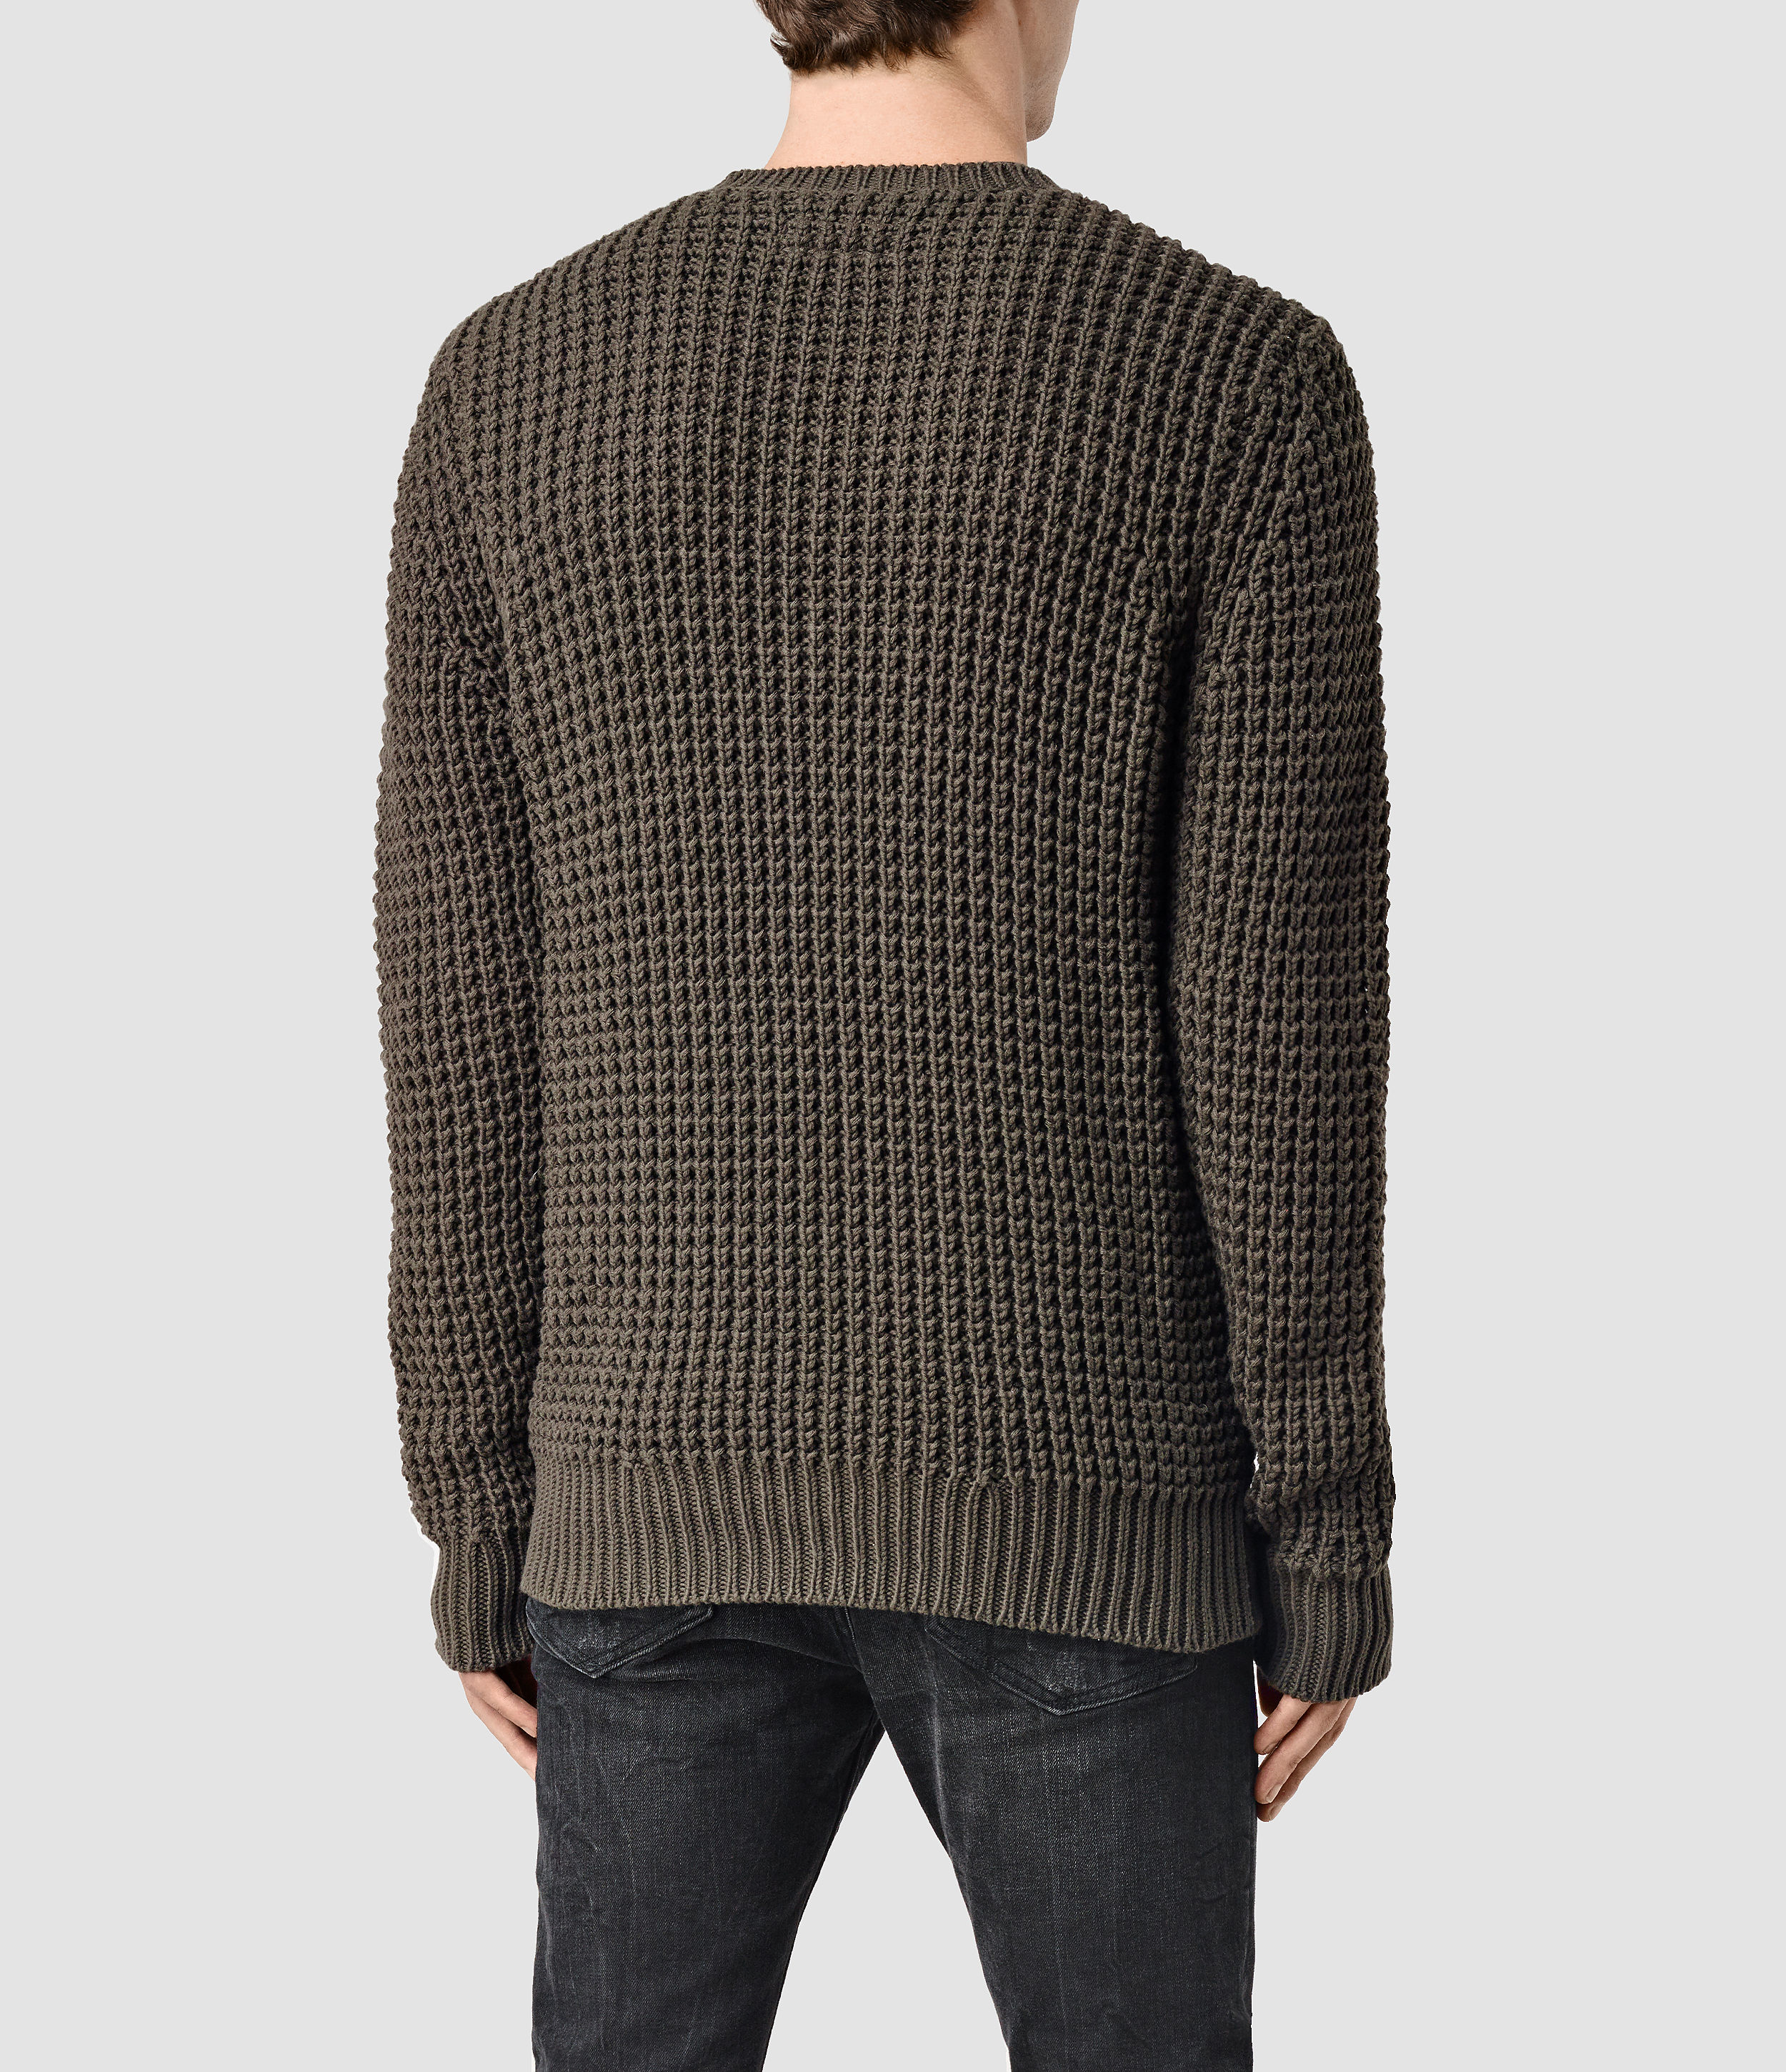 Lyst - Allsaints Rok Crew Sweater Usa Usa in Green for Men